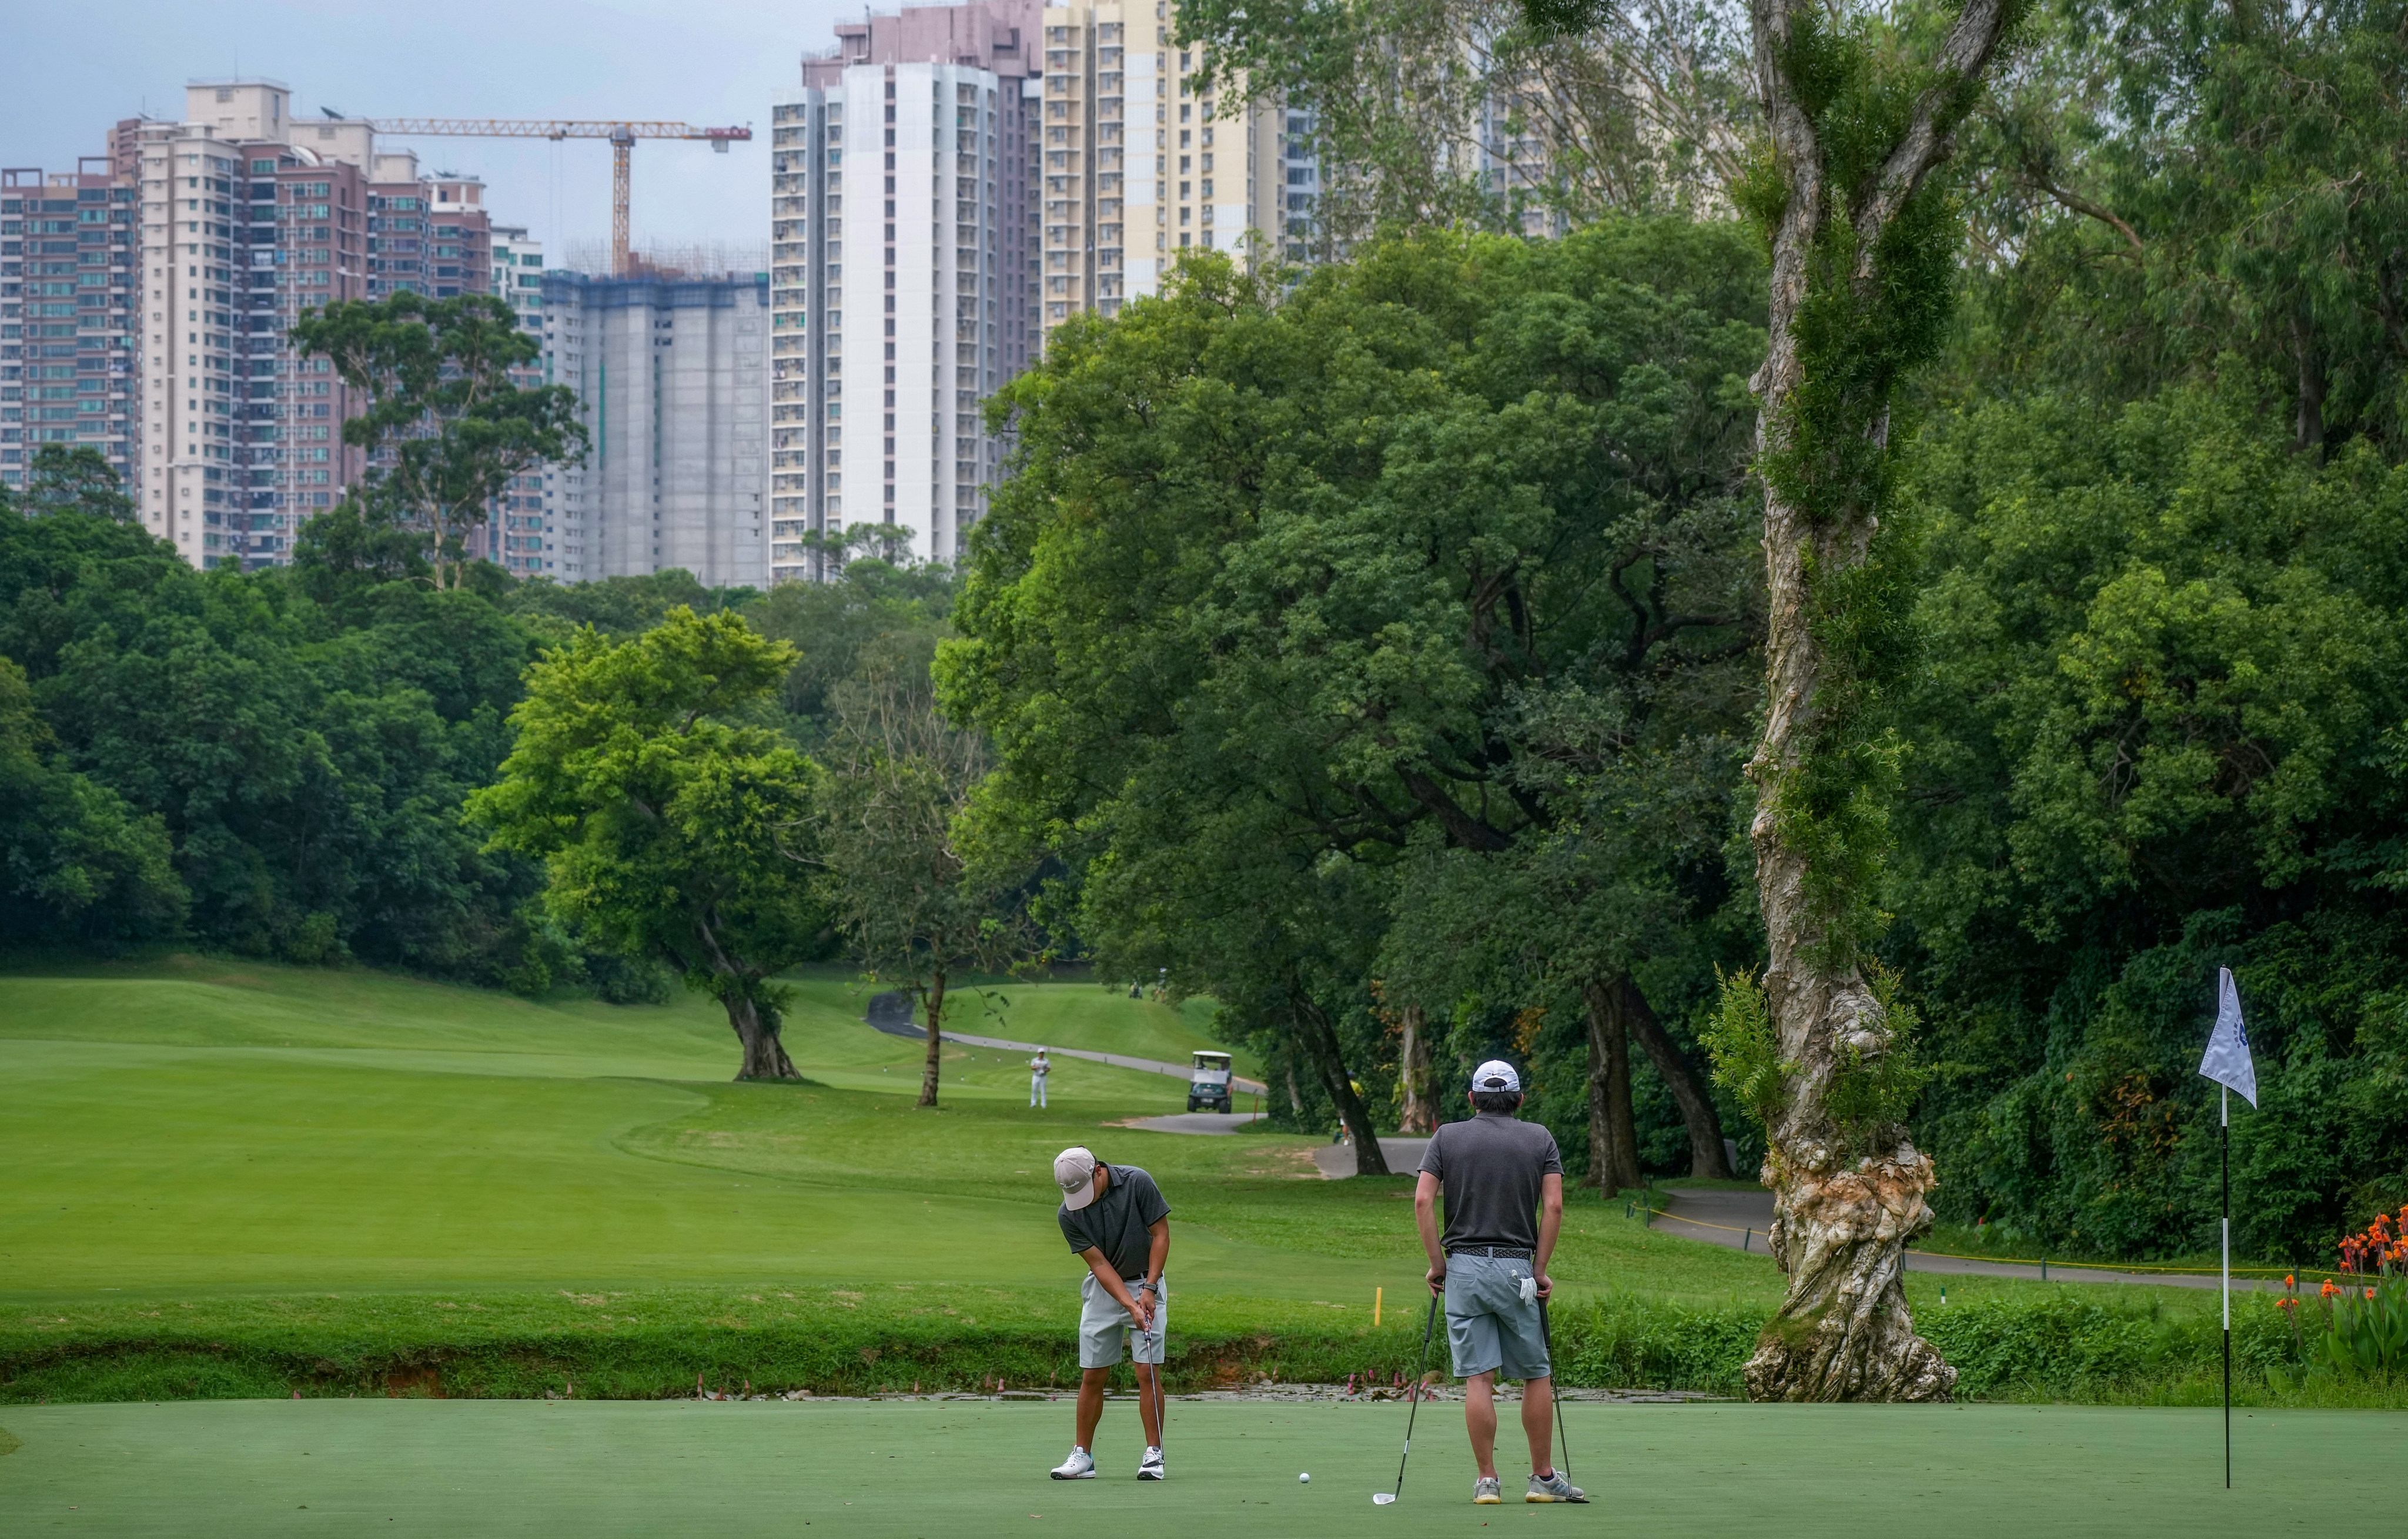 Government plans to redevelop part of the golf club are threatening the future of tournaments in the city, organisers have warned. Photo: Elson Li